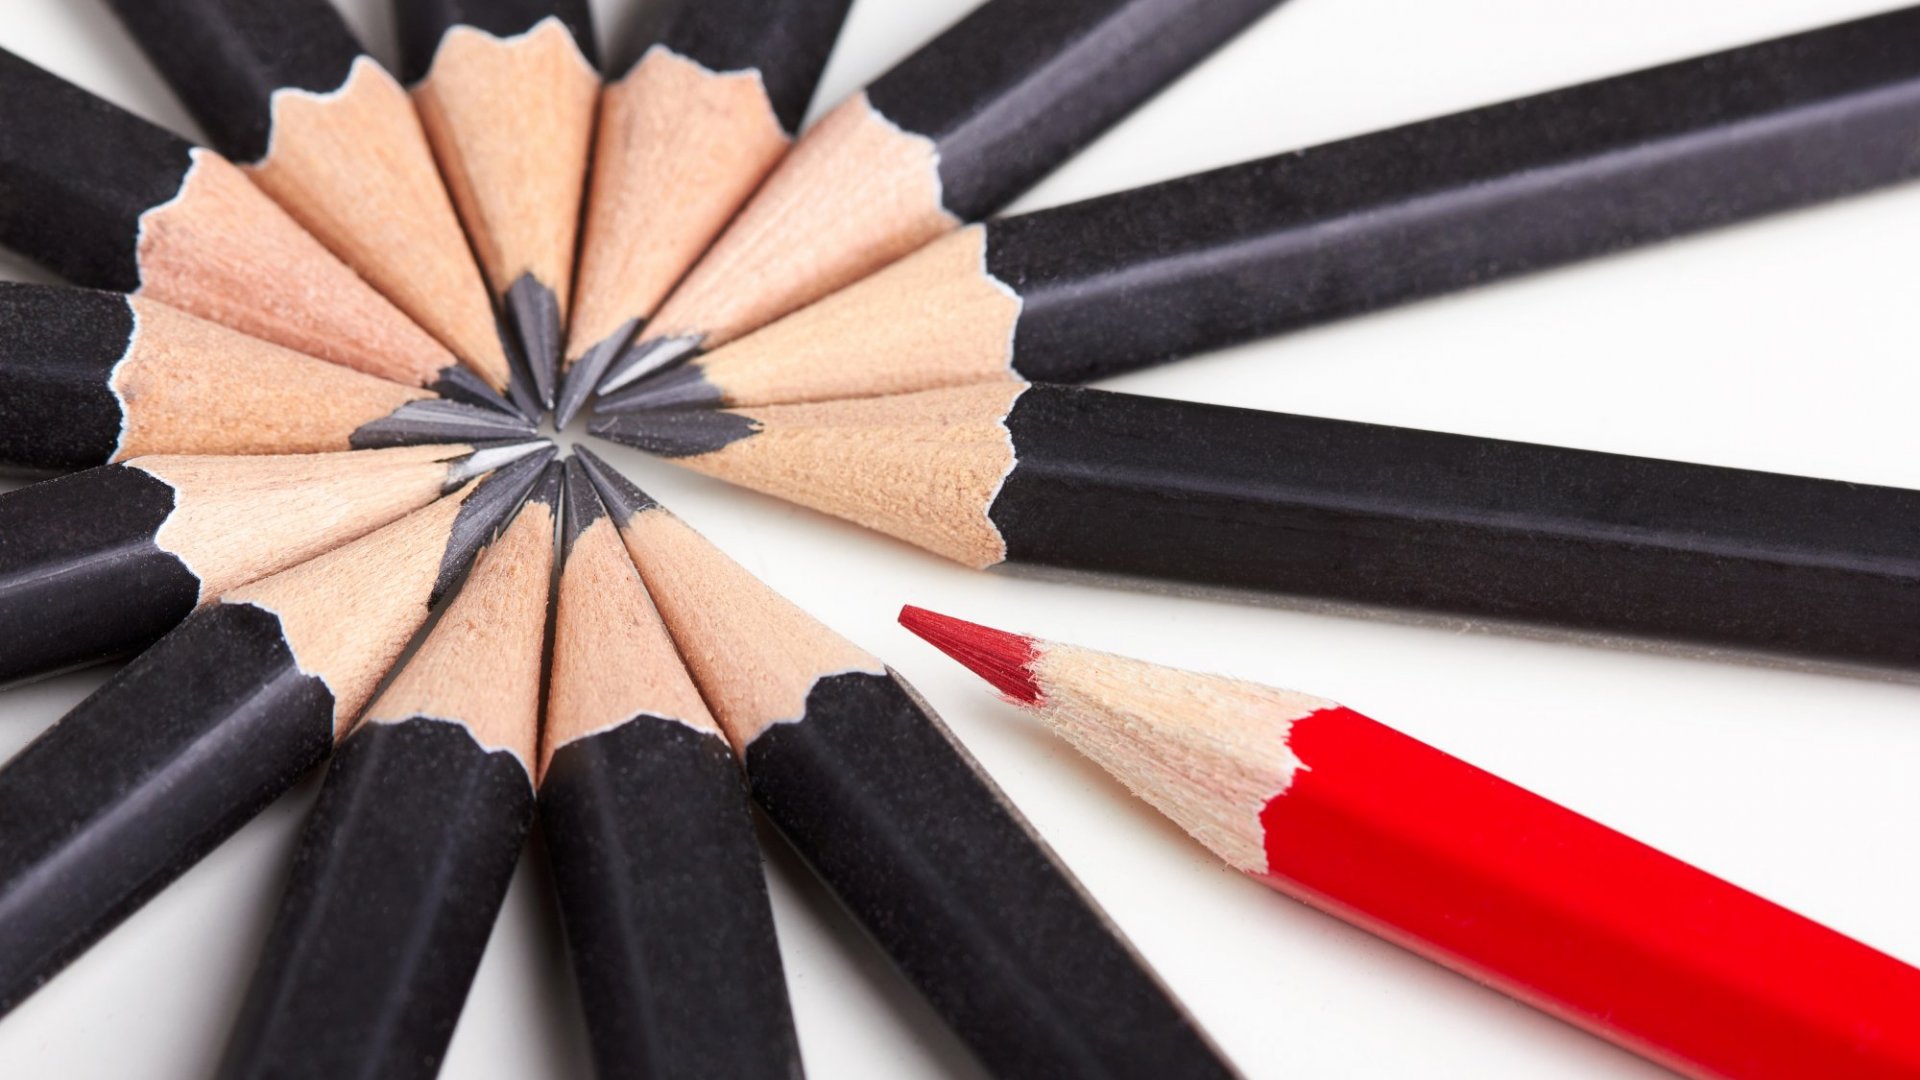 North Lincolnshire Council achieves outstanding from Ofsted. Image shows a circle of black pencils and one red pencil